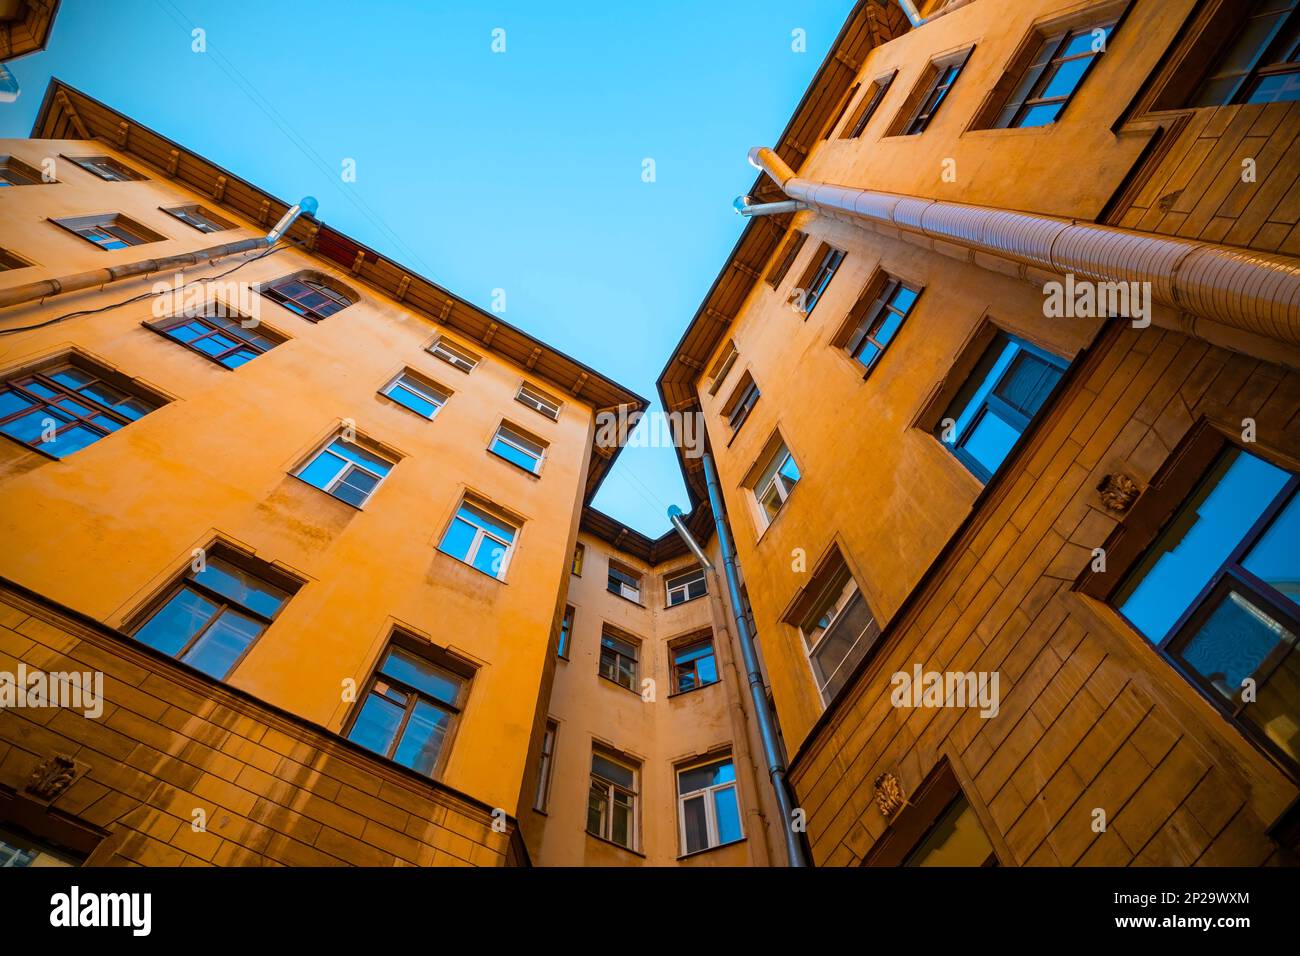 Traditional Court yard or well with bright yellow building in Saint-Petersburg, Russia Stock Photo